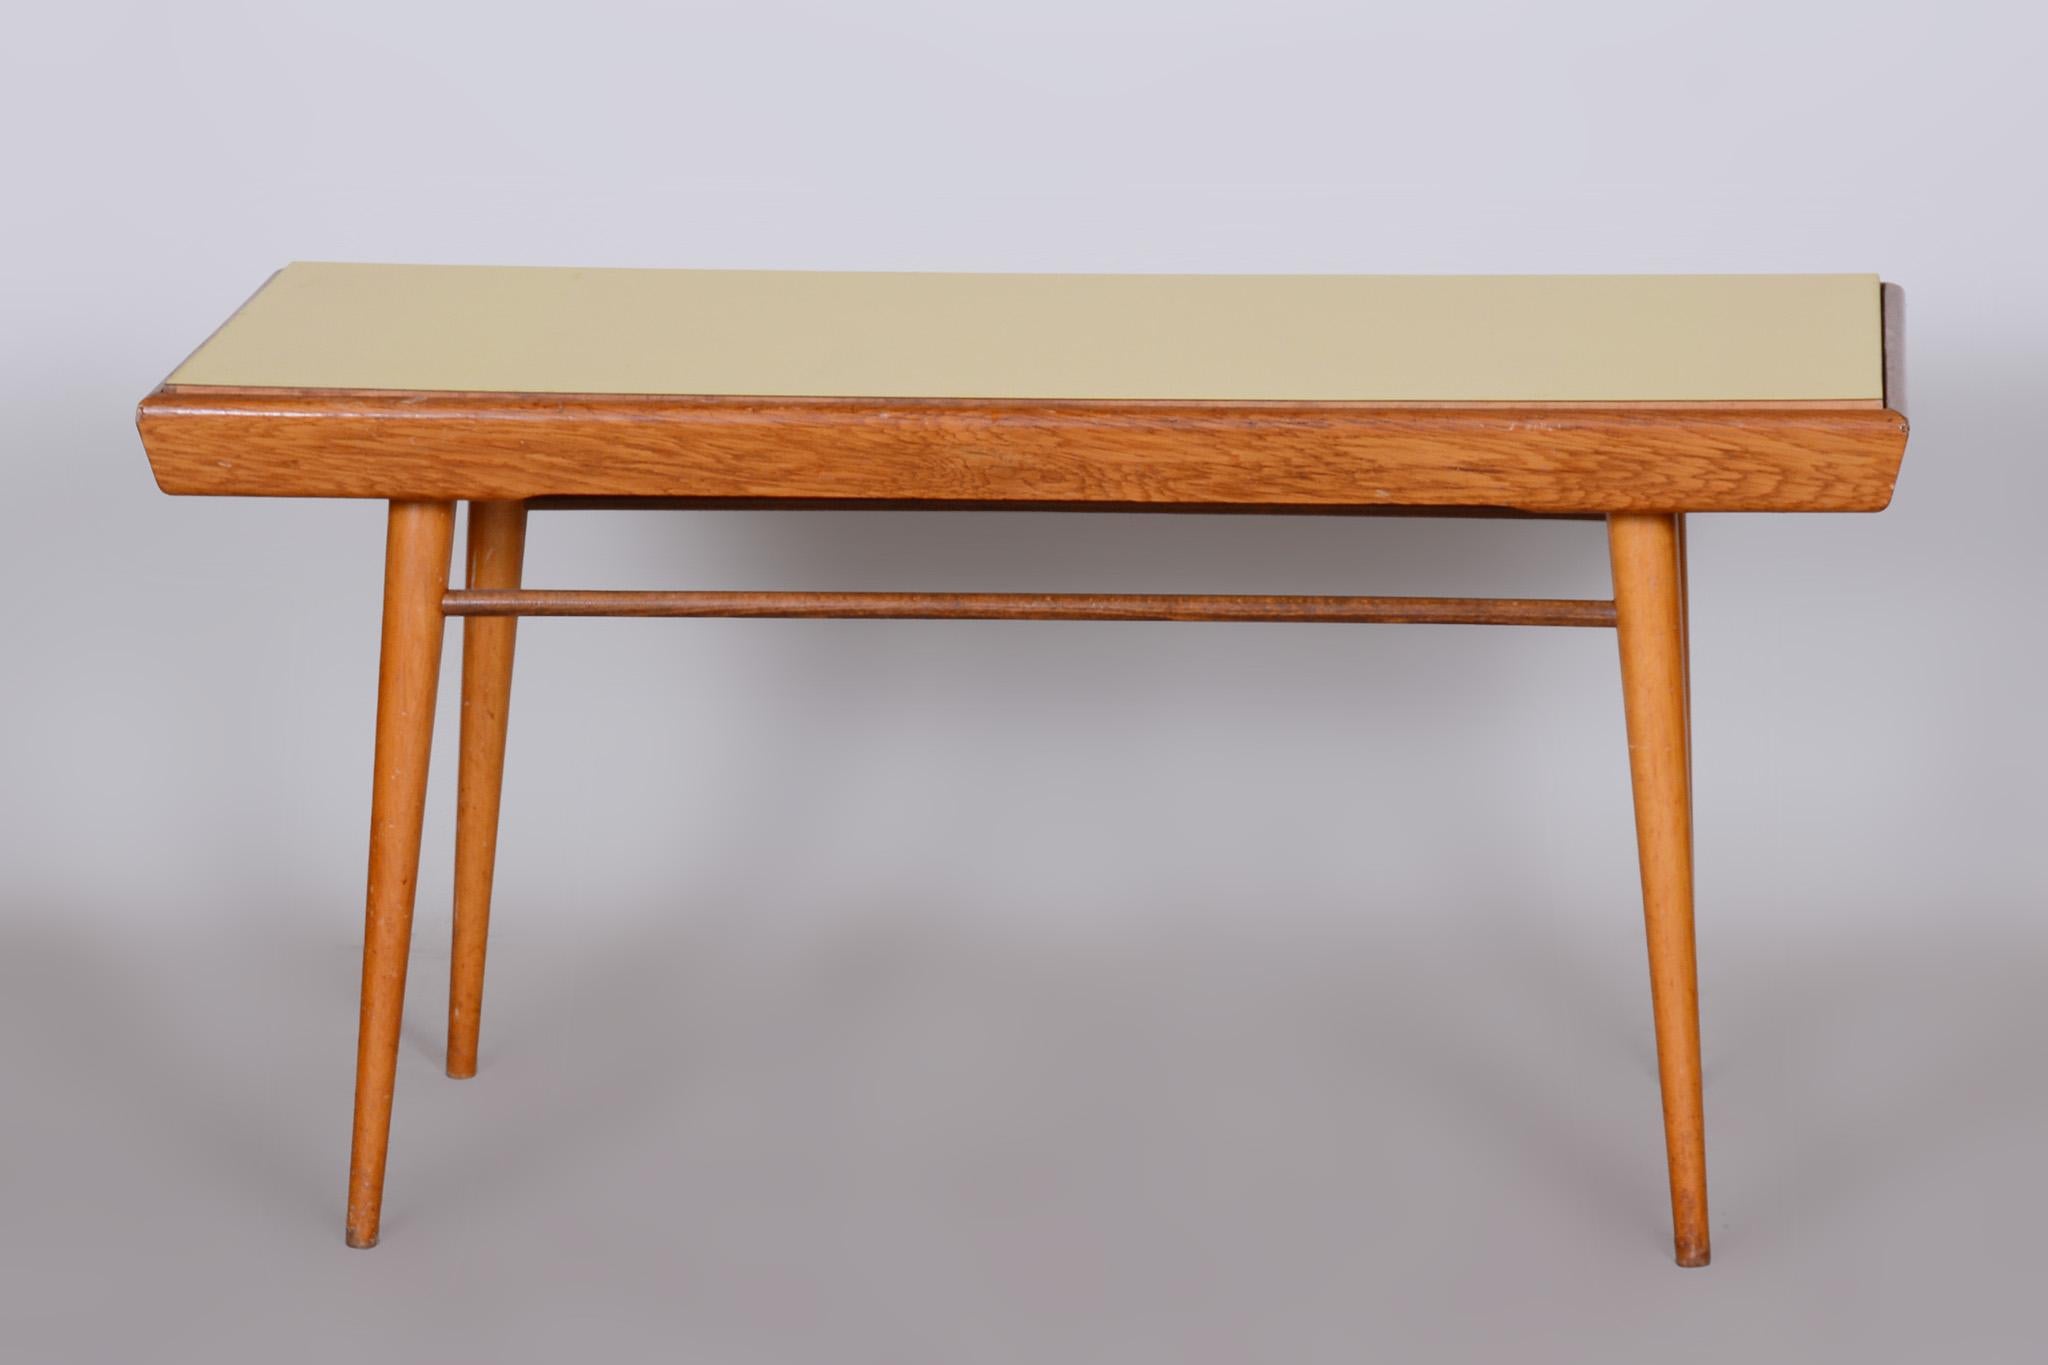 Oak midcentury coffee table.

Source: Czechia
Period: 1950-1959
Material: Oak, umakart

Original well-preserved condition.
Stable solid wood construction.
Revived polish.
Swivel table top.